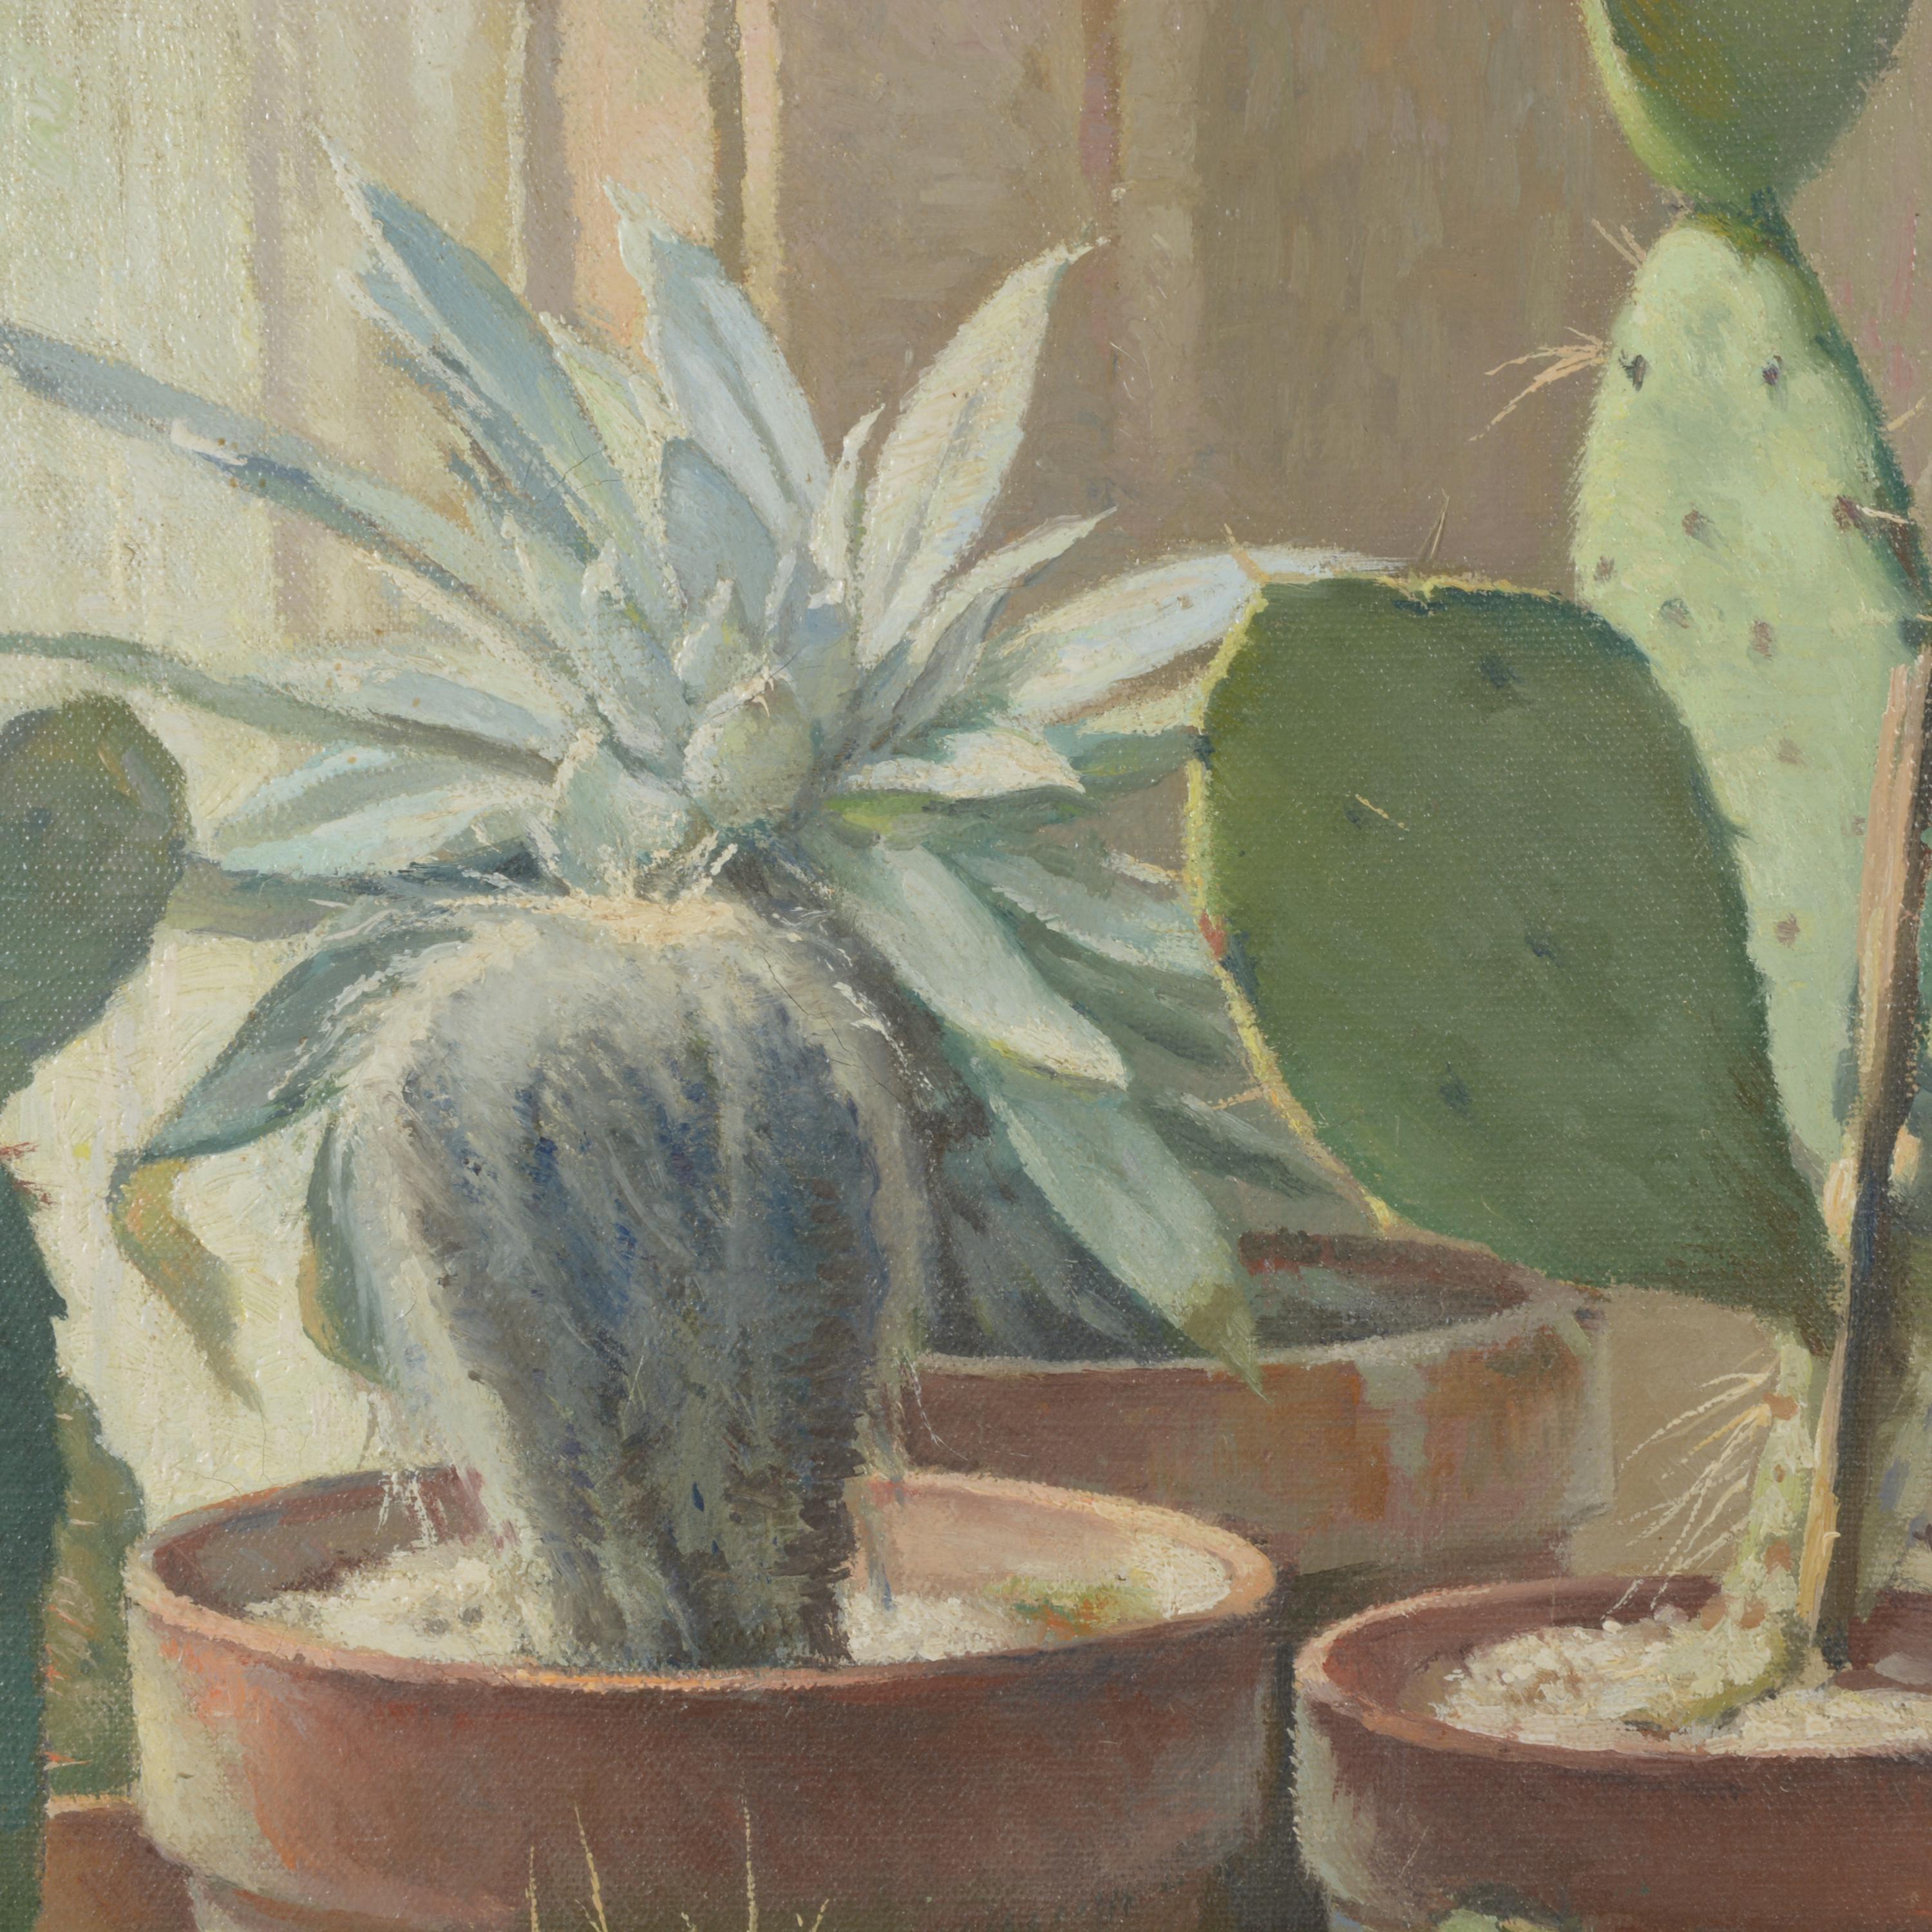 William Hubacek (American 1871-1958)
Cactus Plants
Oil on canvas
Signed and dated lower left: 'Wm. Hubacek 1946'
18.75in H x 15.5in L 
With a gilt frame: 21in H x 17.5in L
A Bay Area local, Hubacek is a highly competent painter of still lifes and